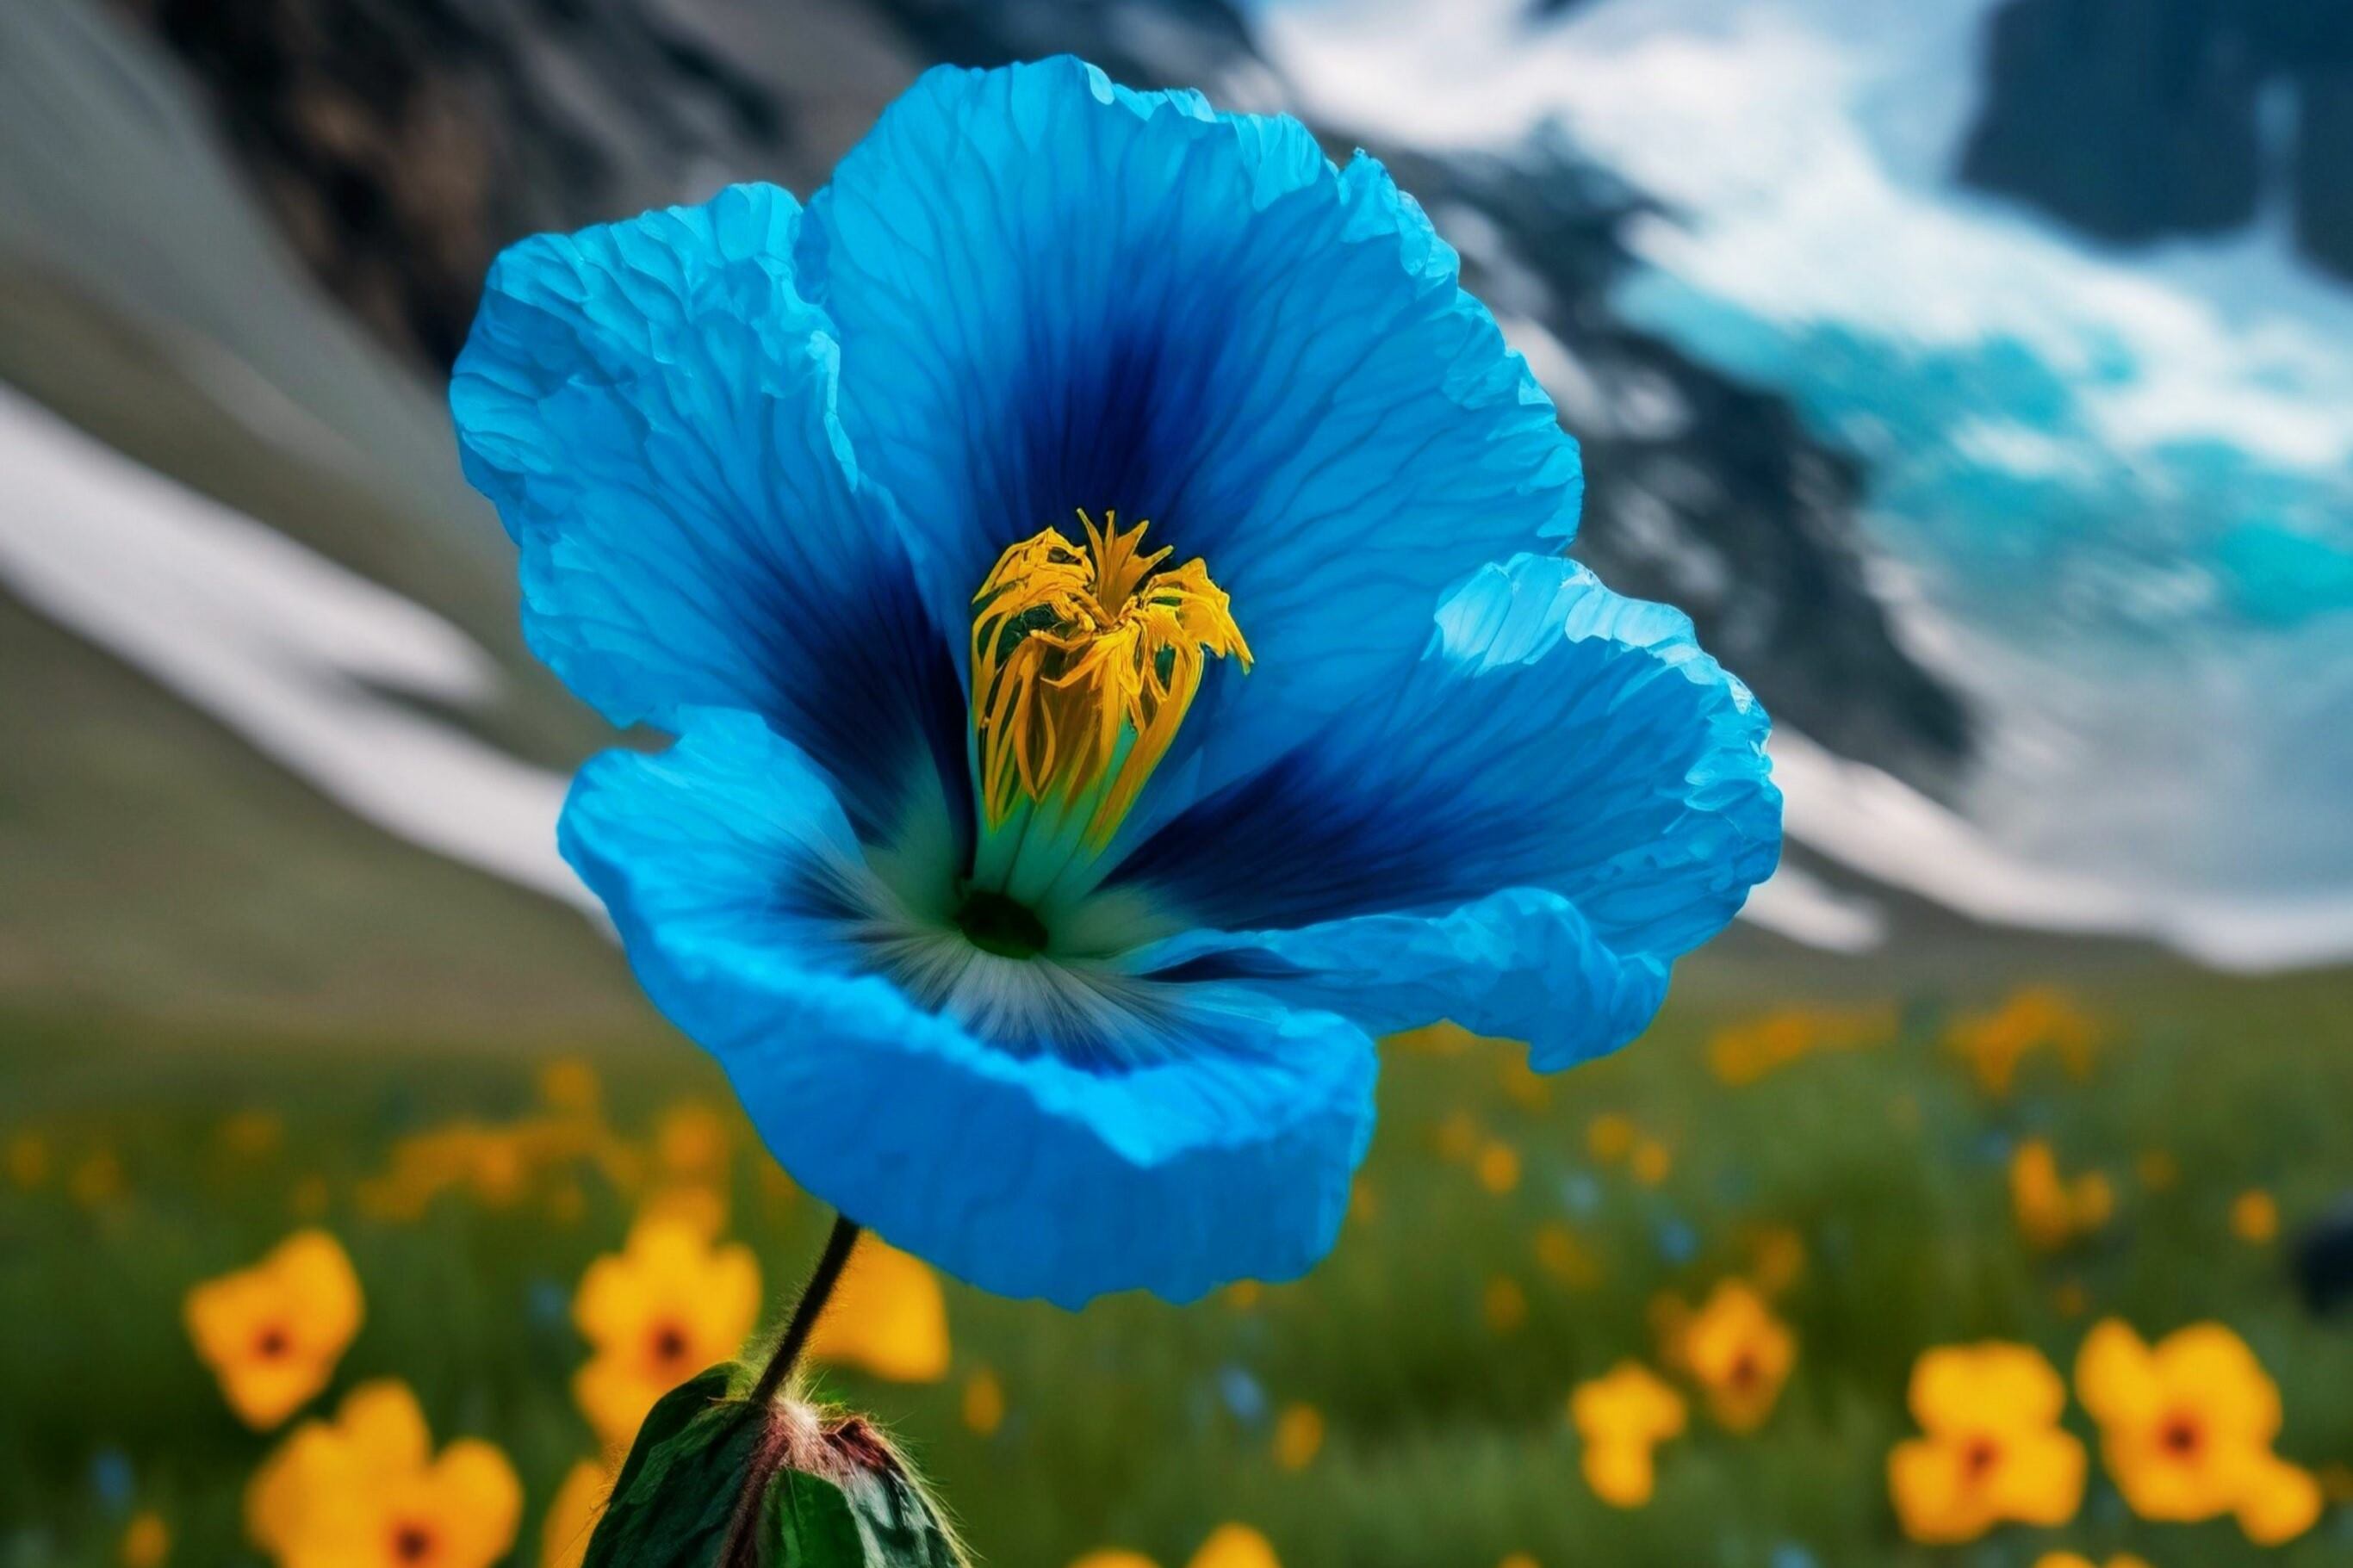 Discover The Meaning Behind Blue And Yellow Flowers – A Symbol Of Joy And Serenity!